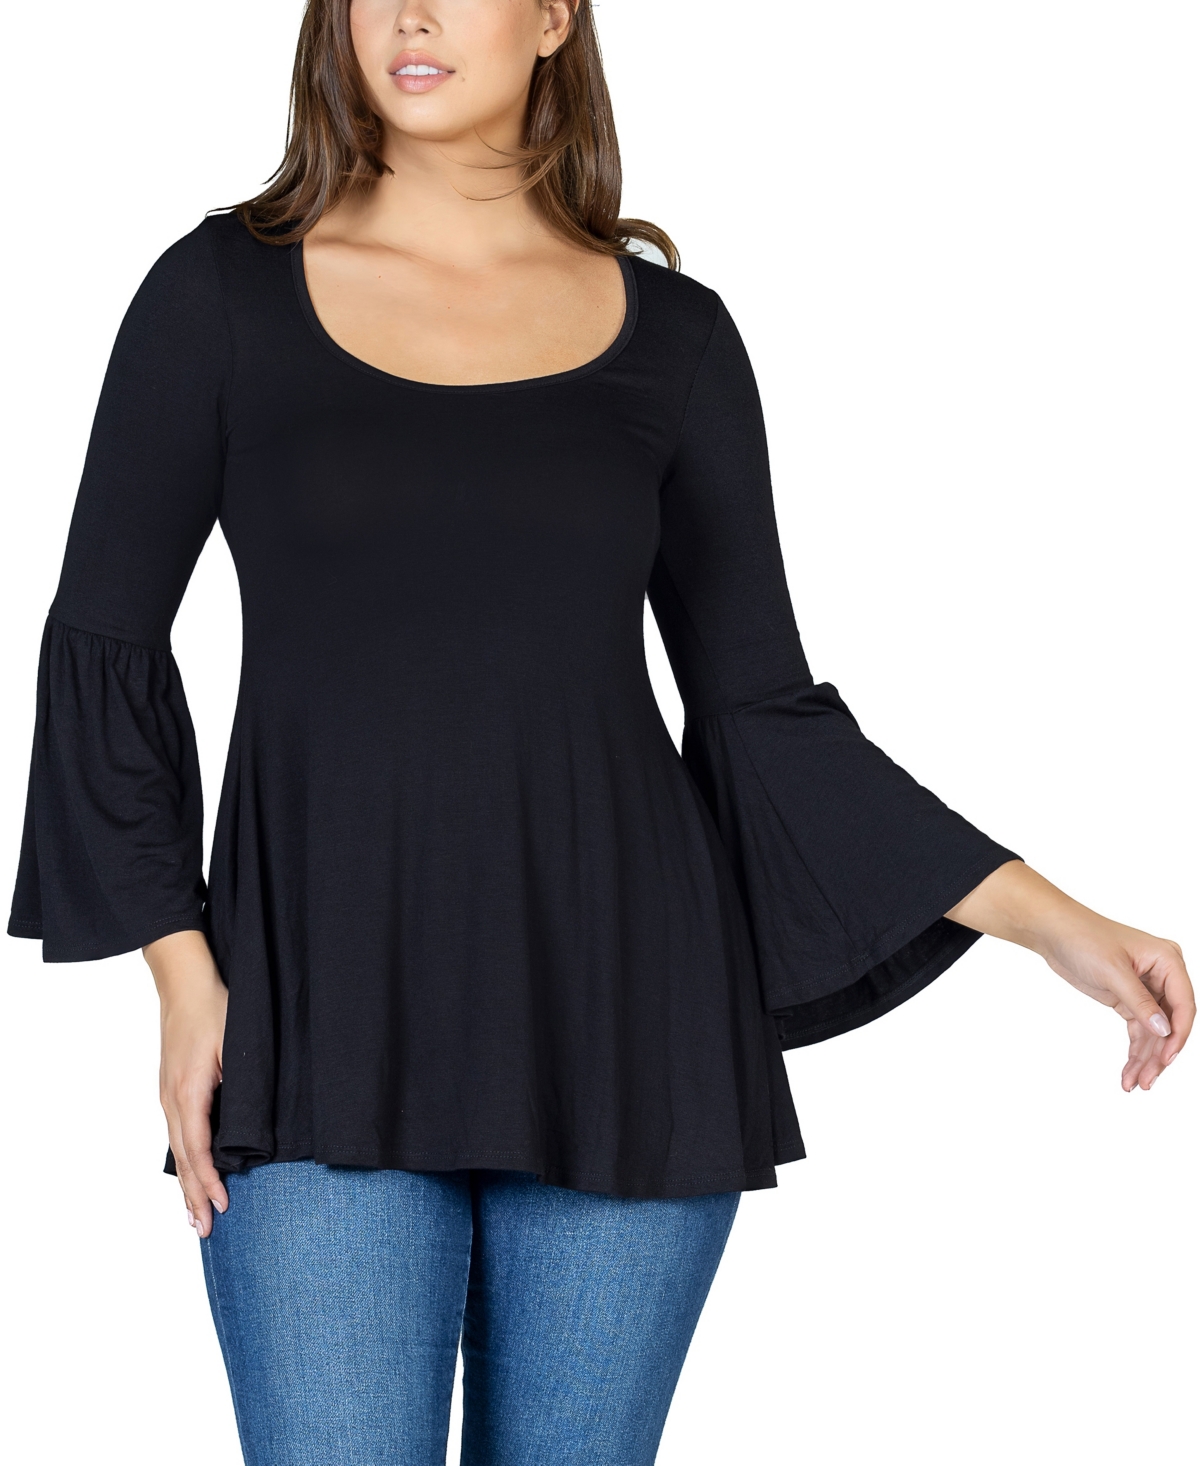 24seven Comfort Apparel Women's Bell Sleeve Flared Tunic Top In Black